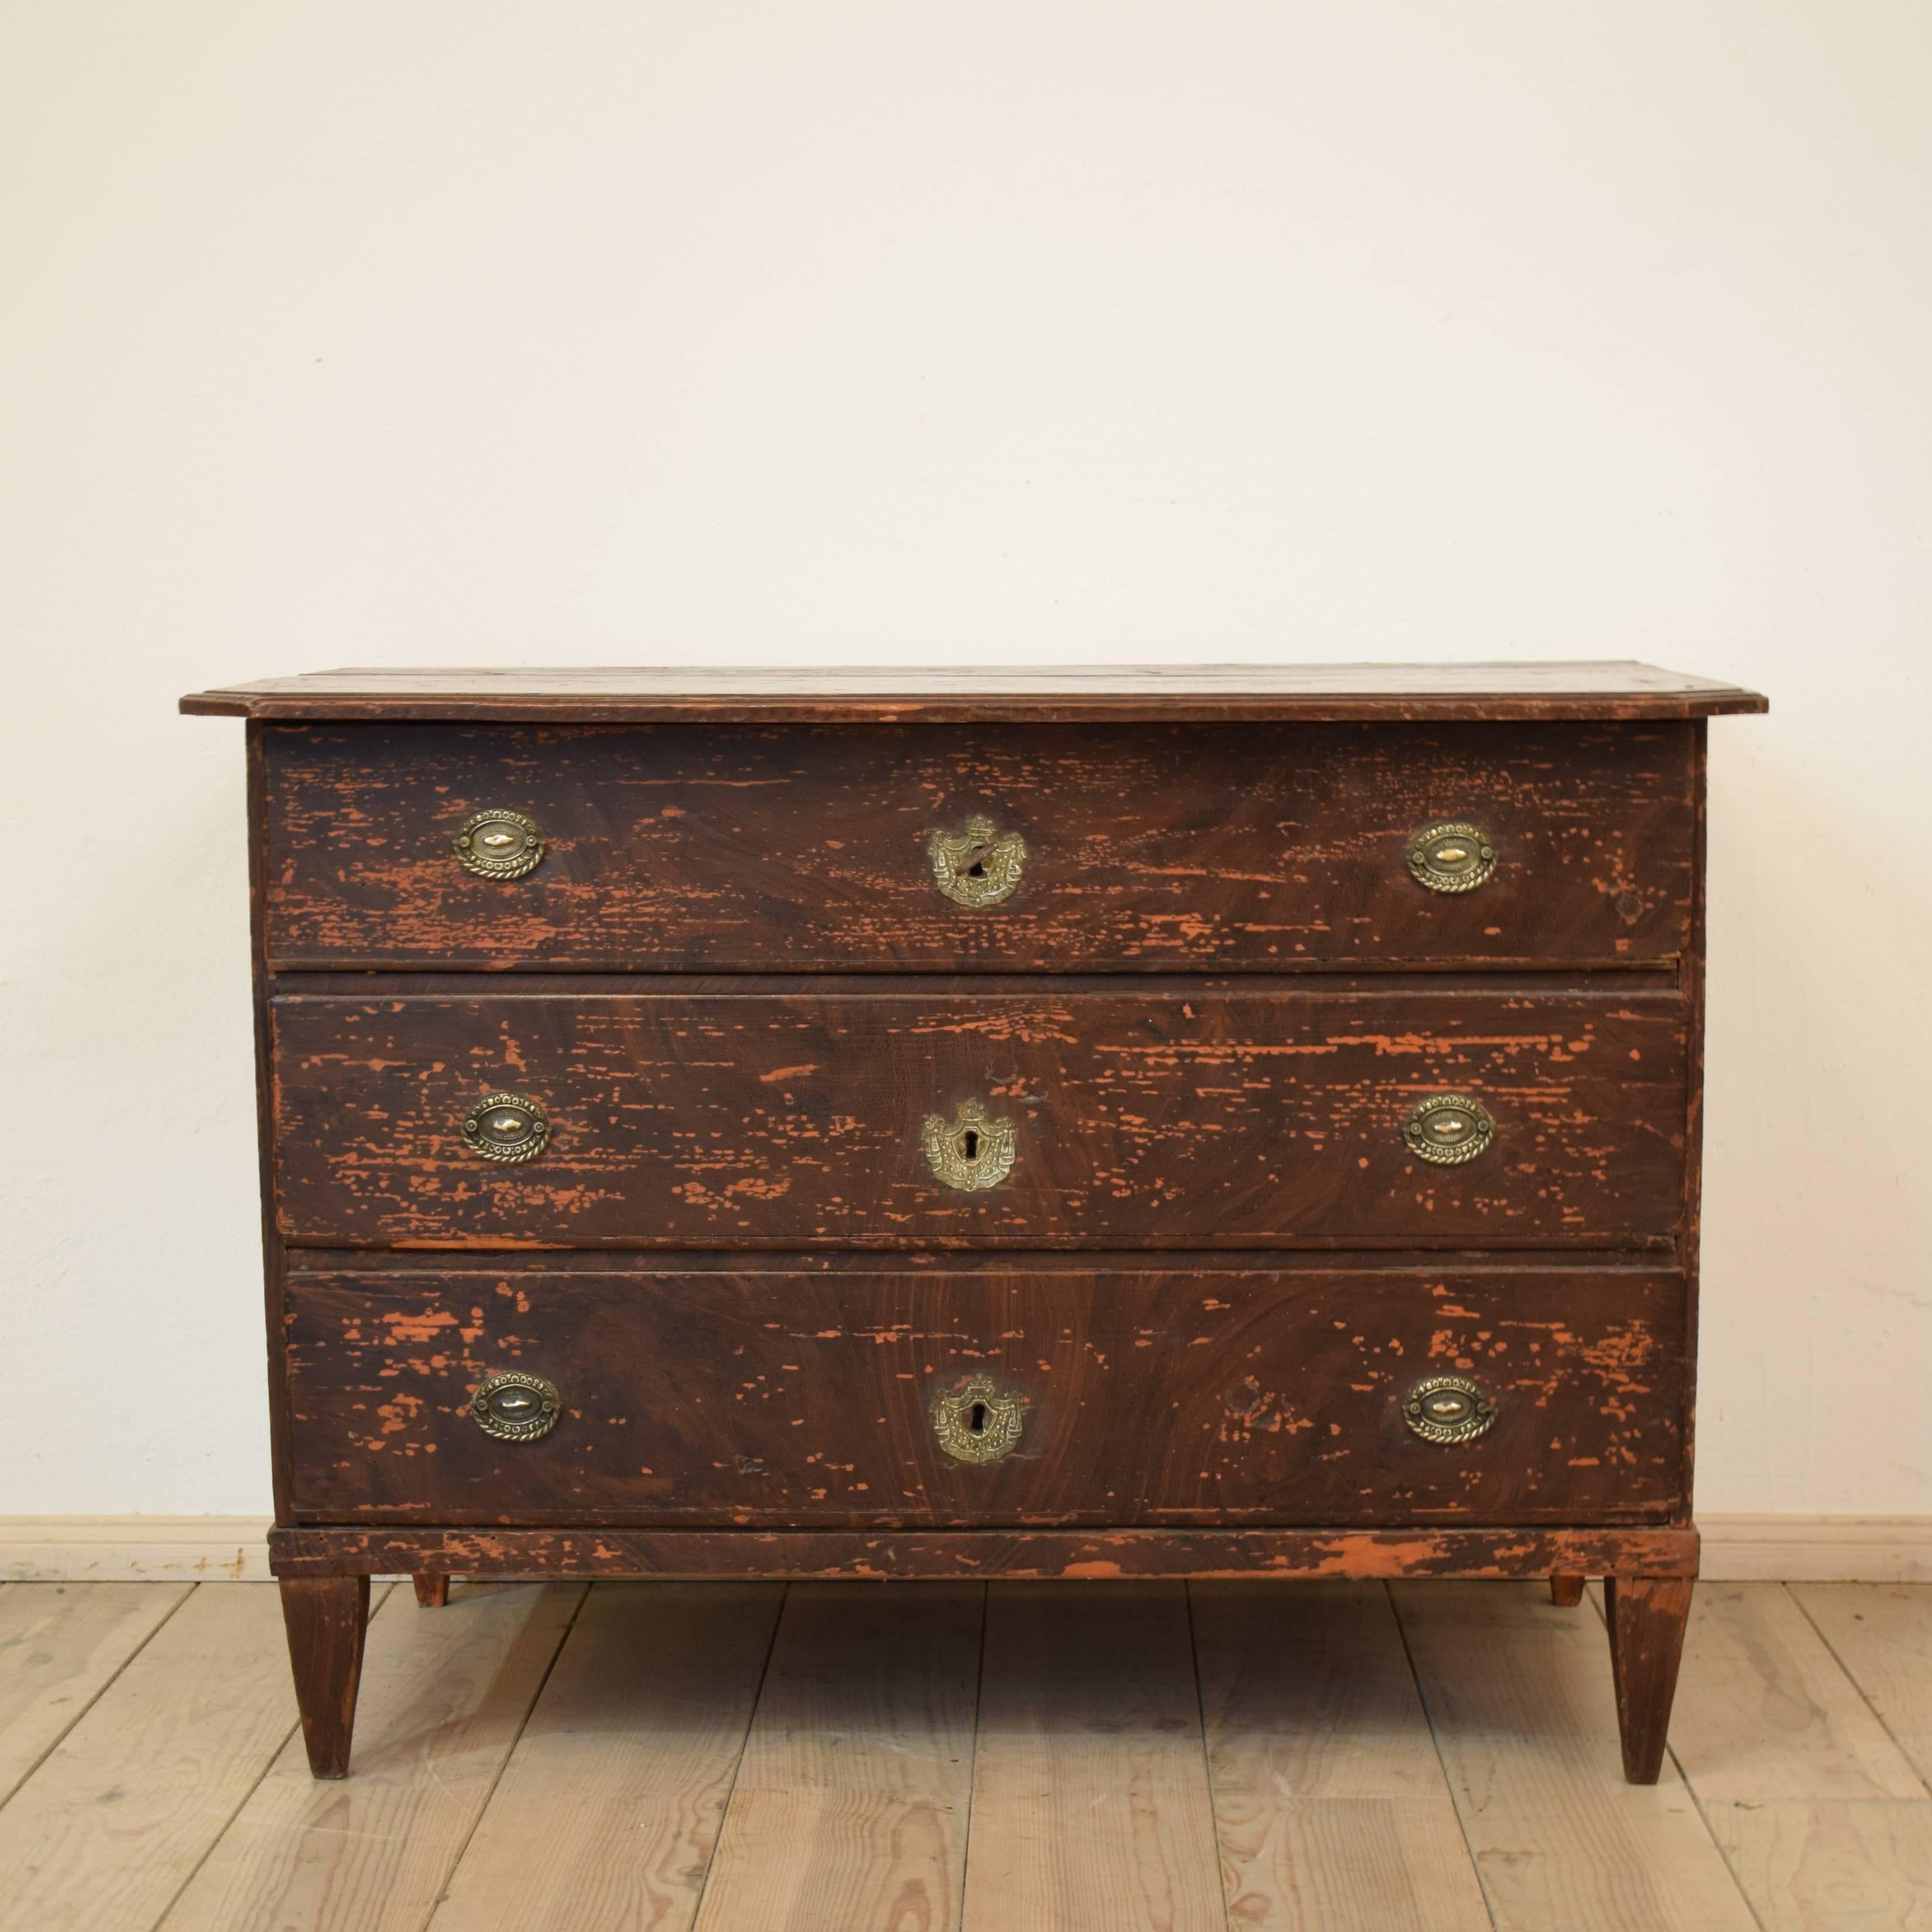 This 19th century Biedermeier chest of drawers remains a lot of the original faux wood grain painting. The commode is made circa 1800 in Germany. It has it original hardware / handles and locks.
A great Gustavian furniture in its original condition.